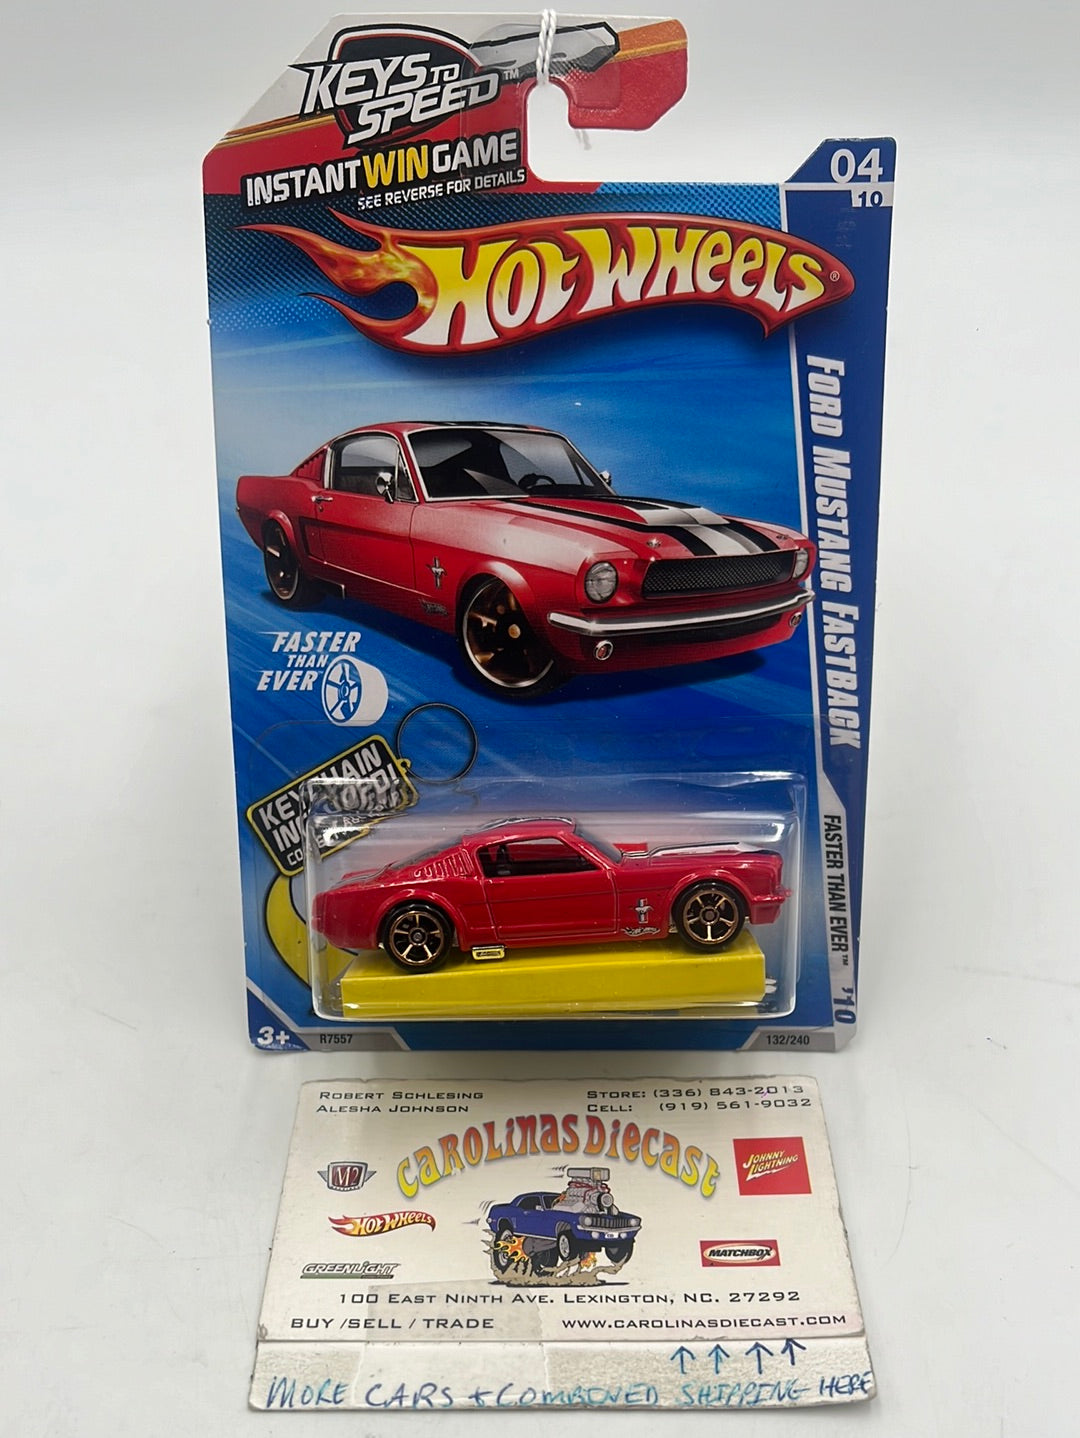 2010 Hot Wheels Faster Than Ever Ford Mustang Fastback Walmart